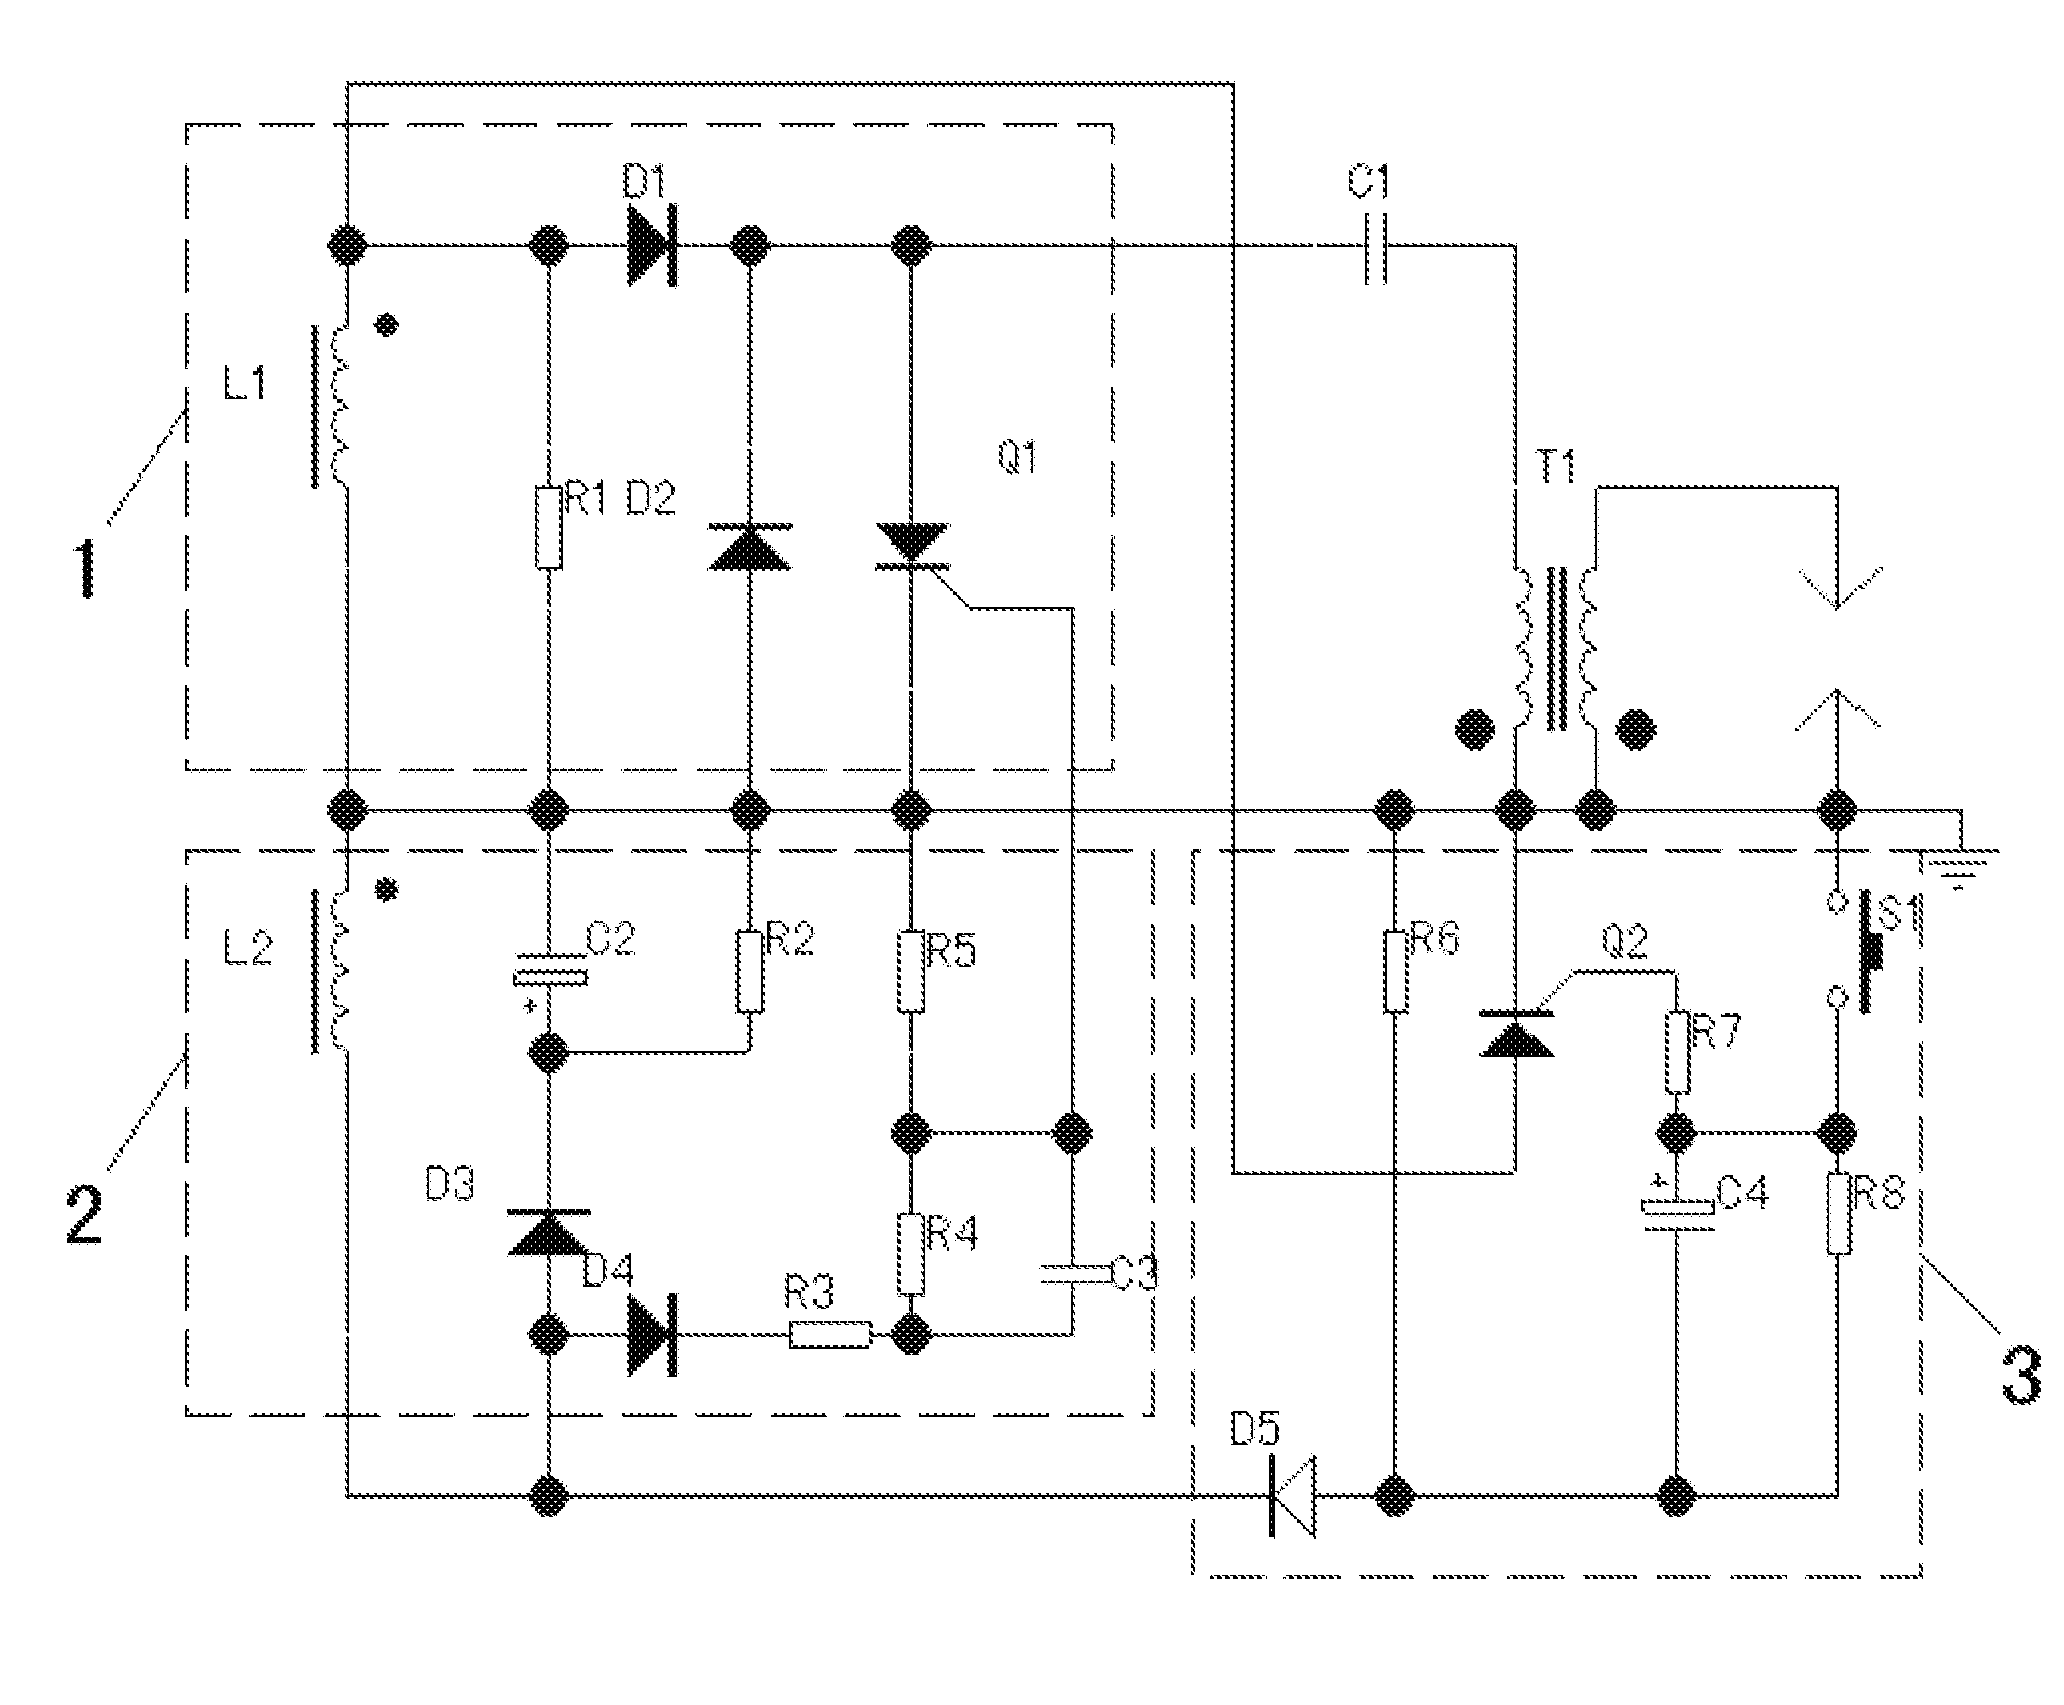 Capacitive igniter with a flameout time-delay function